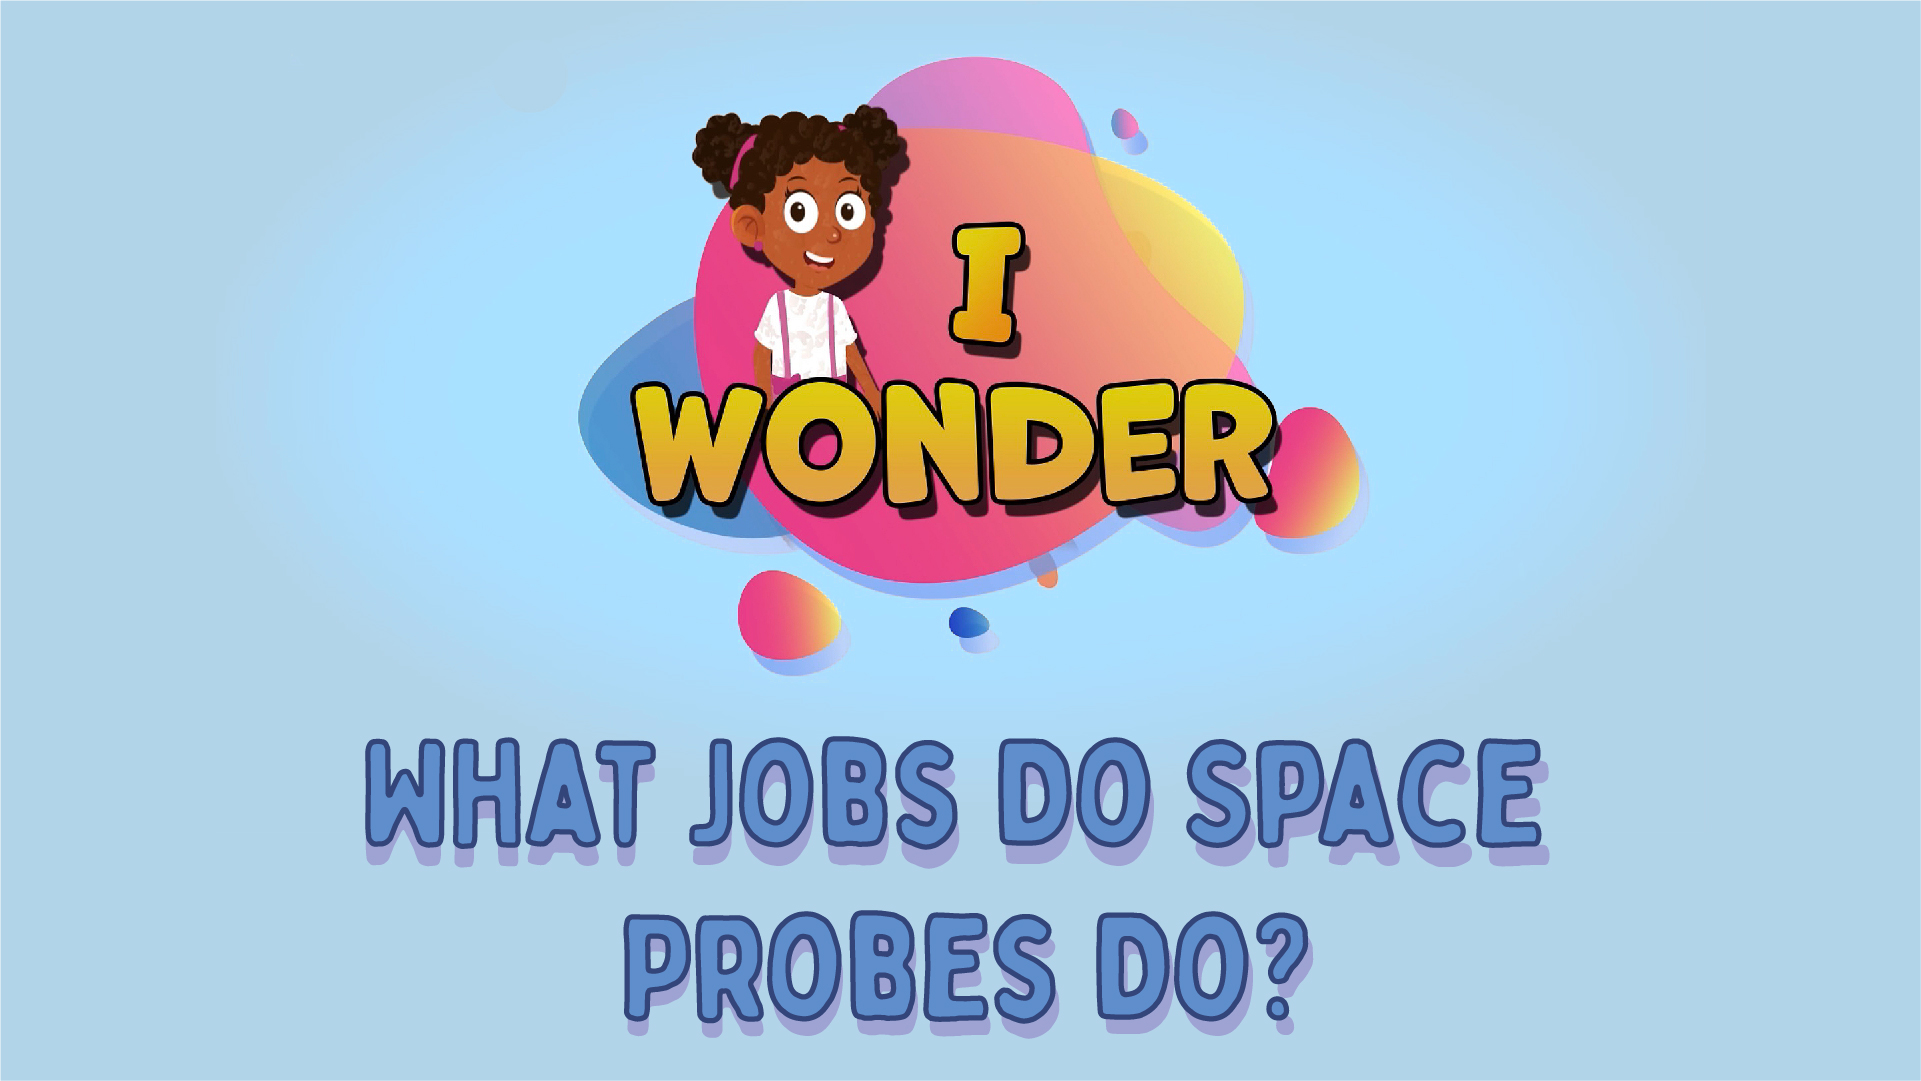 What Jobs Do Space Probes Do?